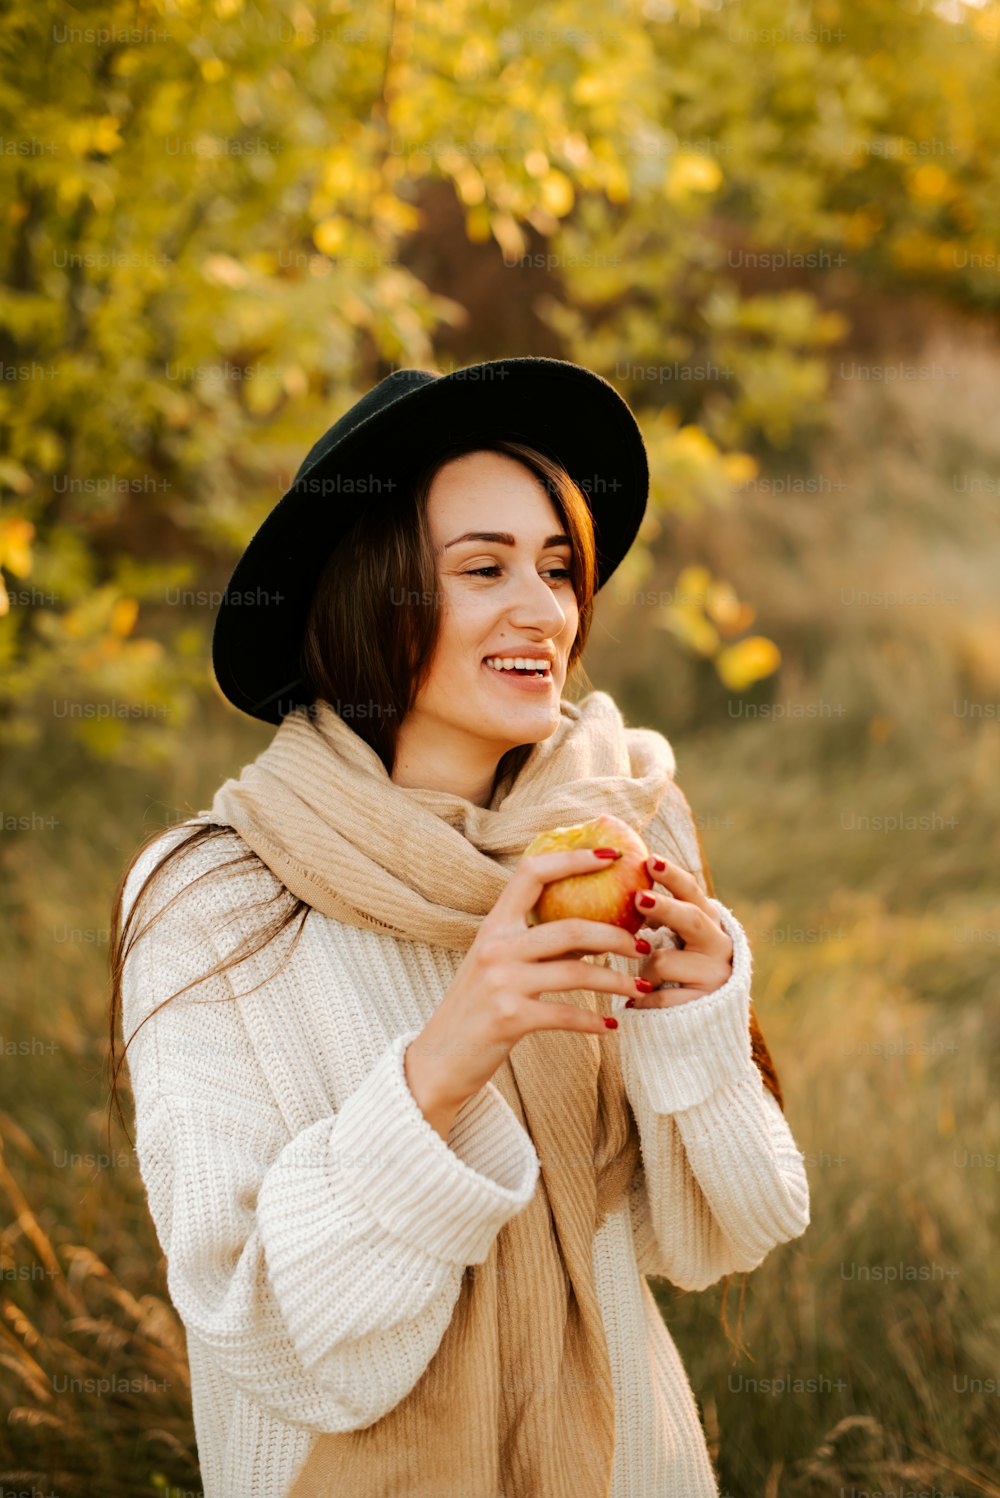 a woman wearing a hat and scarf holding a hot dog